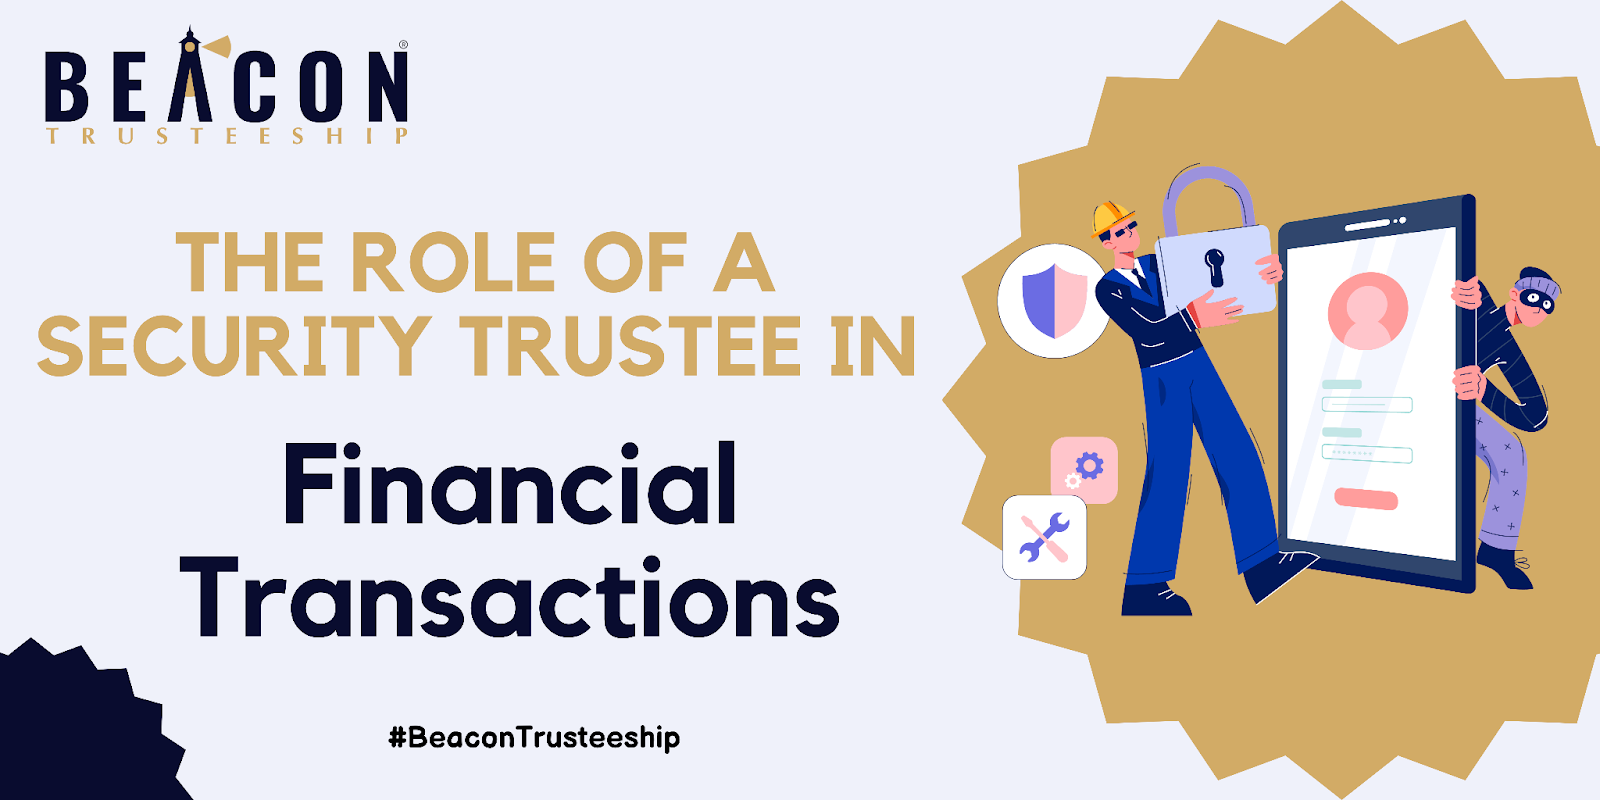 The Role of a Security Trustee in Financial Transactions